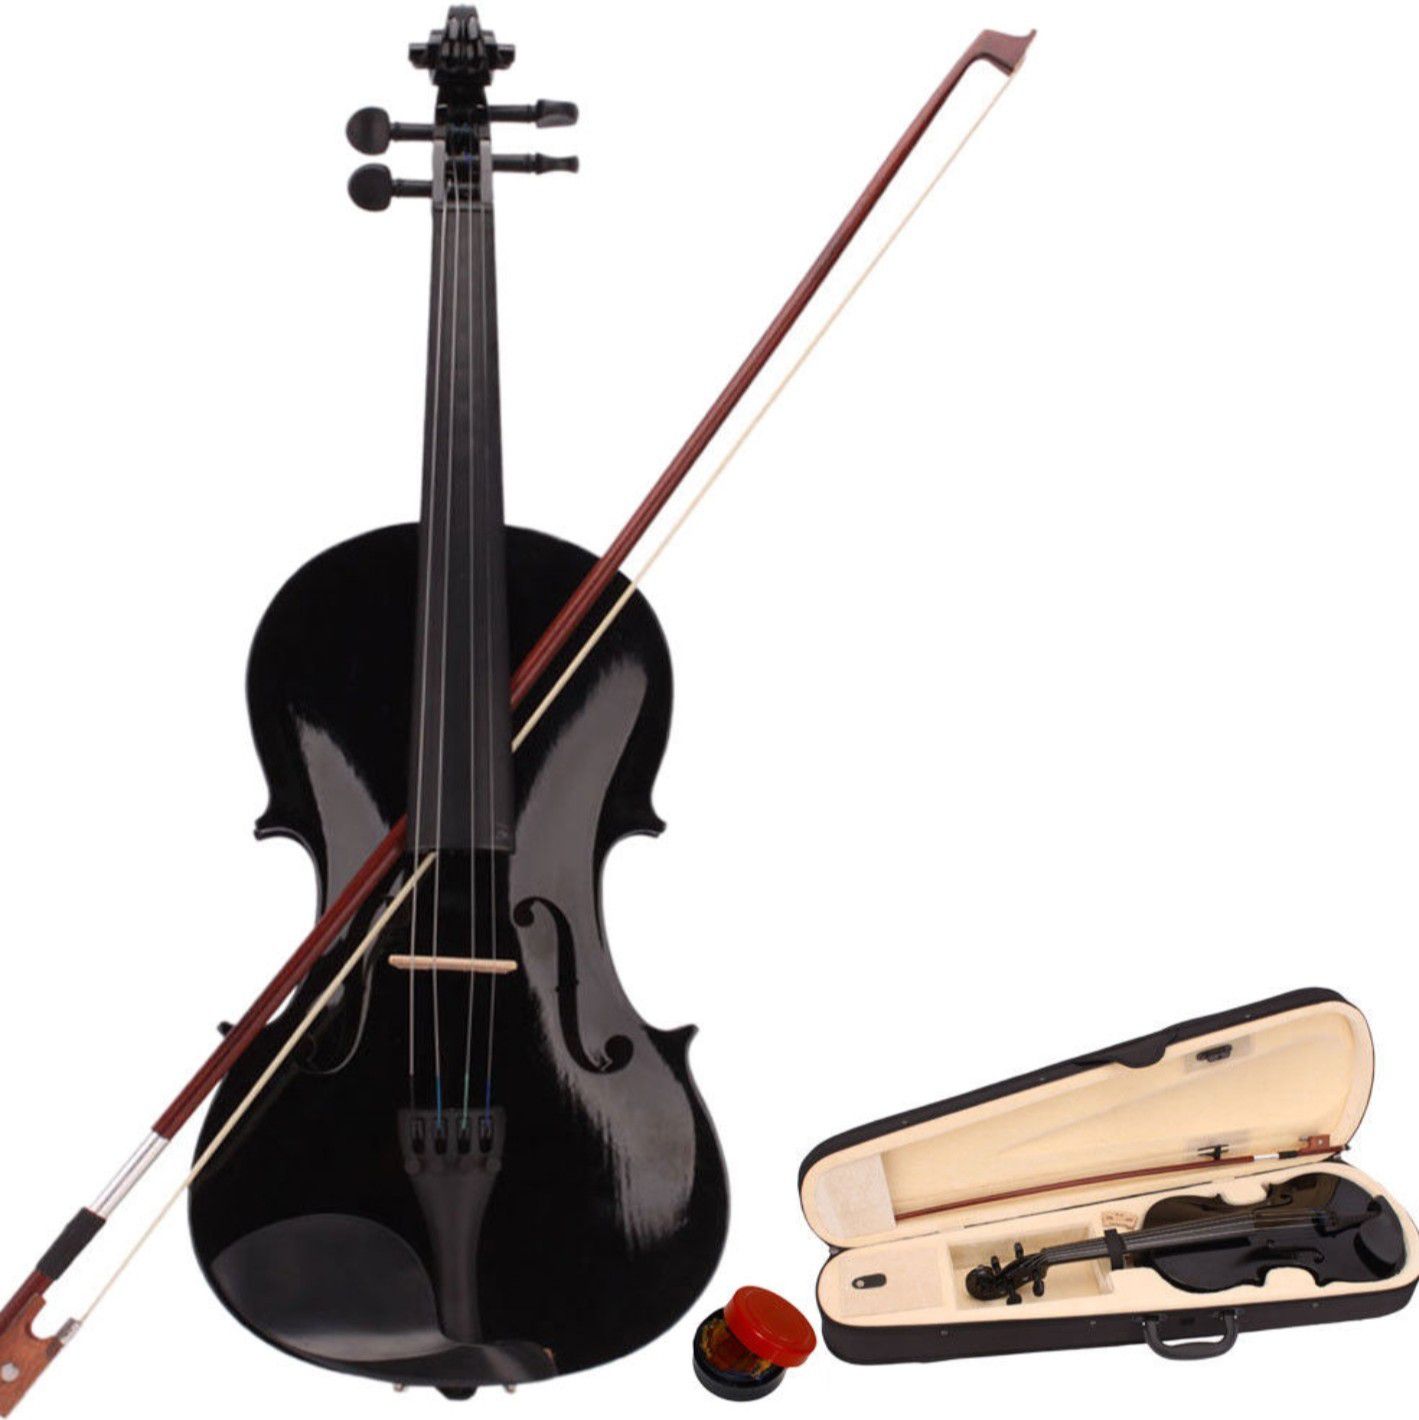 New Band 4/4 Acoustic Orchestral Violin Fiddle Black with Case Bow Rosin